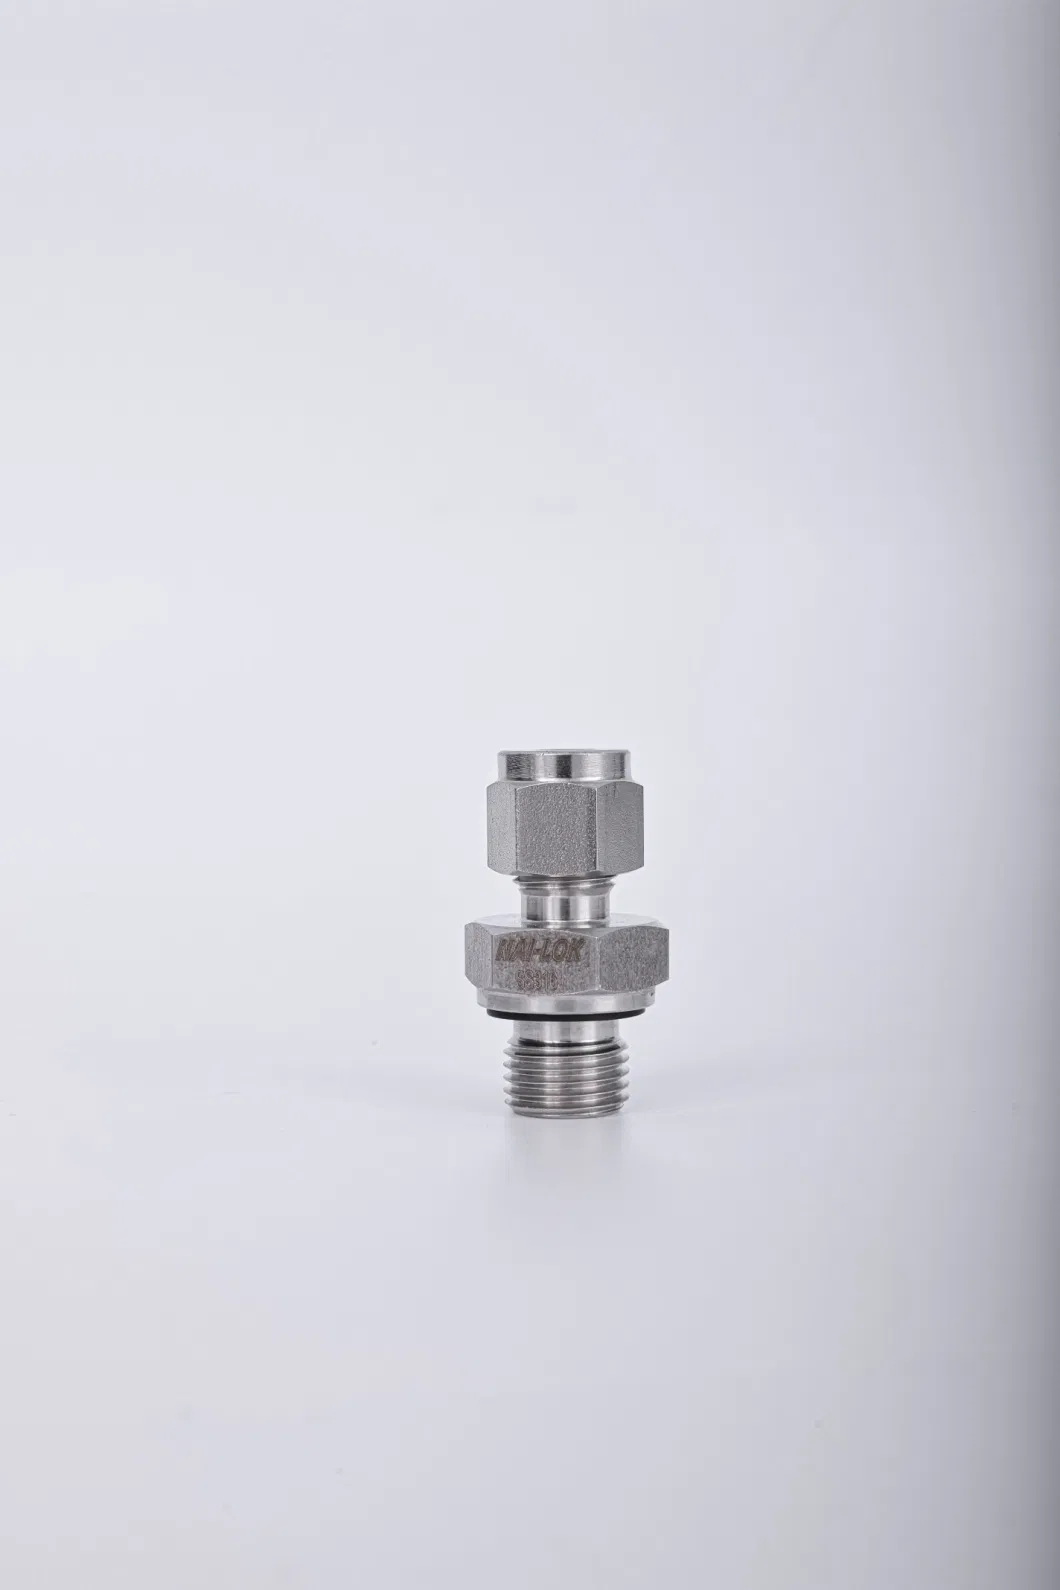 Tube Fitting Metal 316 Stainless Steel 1/8 Inch NPT Compression Fitting Male Connector Instrument Fittings Tube